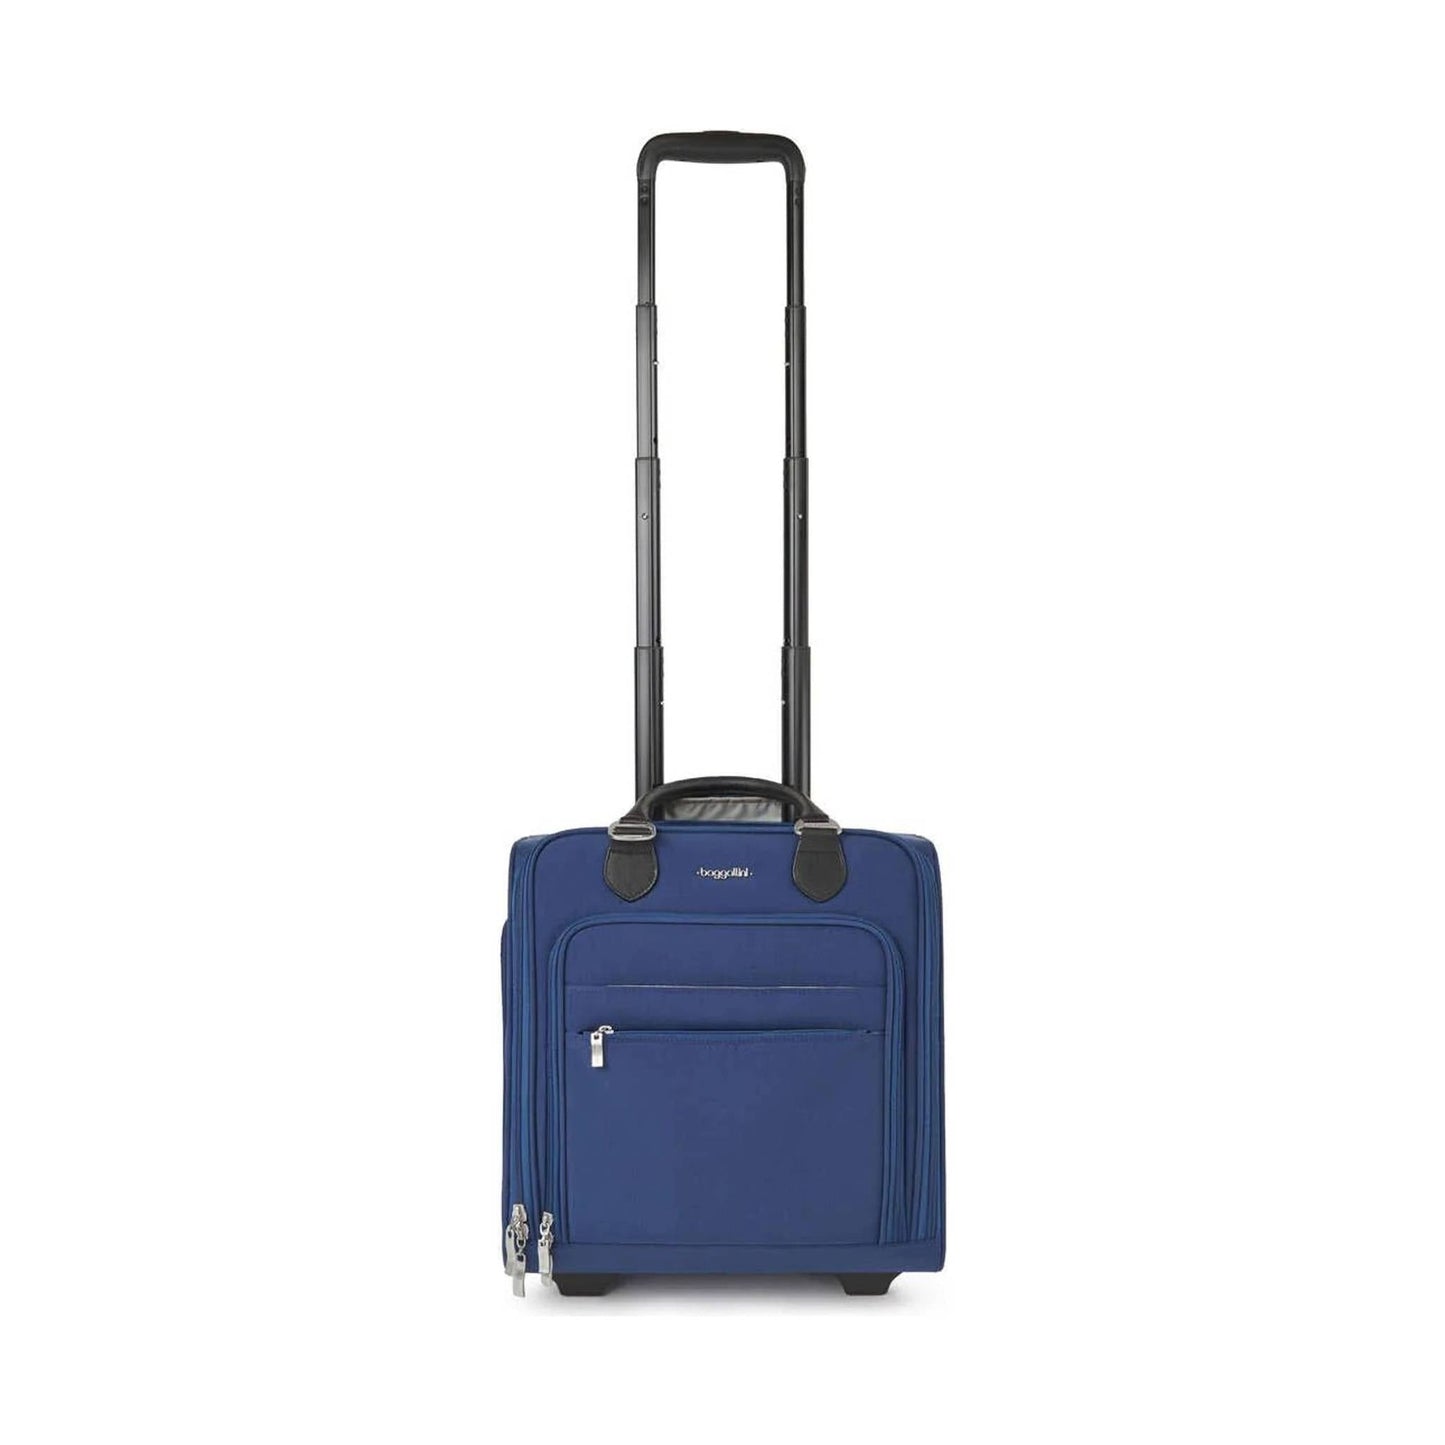 Baggallini Two Wheel Underseat Carry-On - Pacific